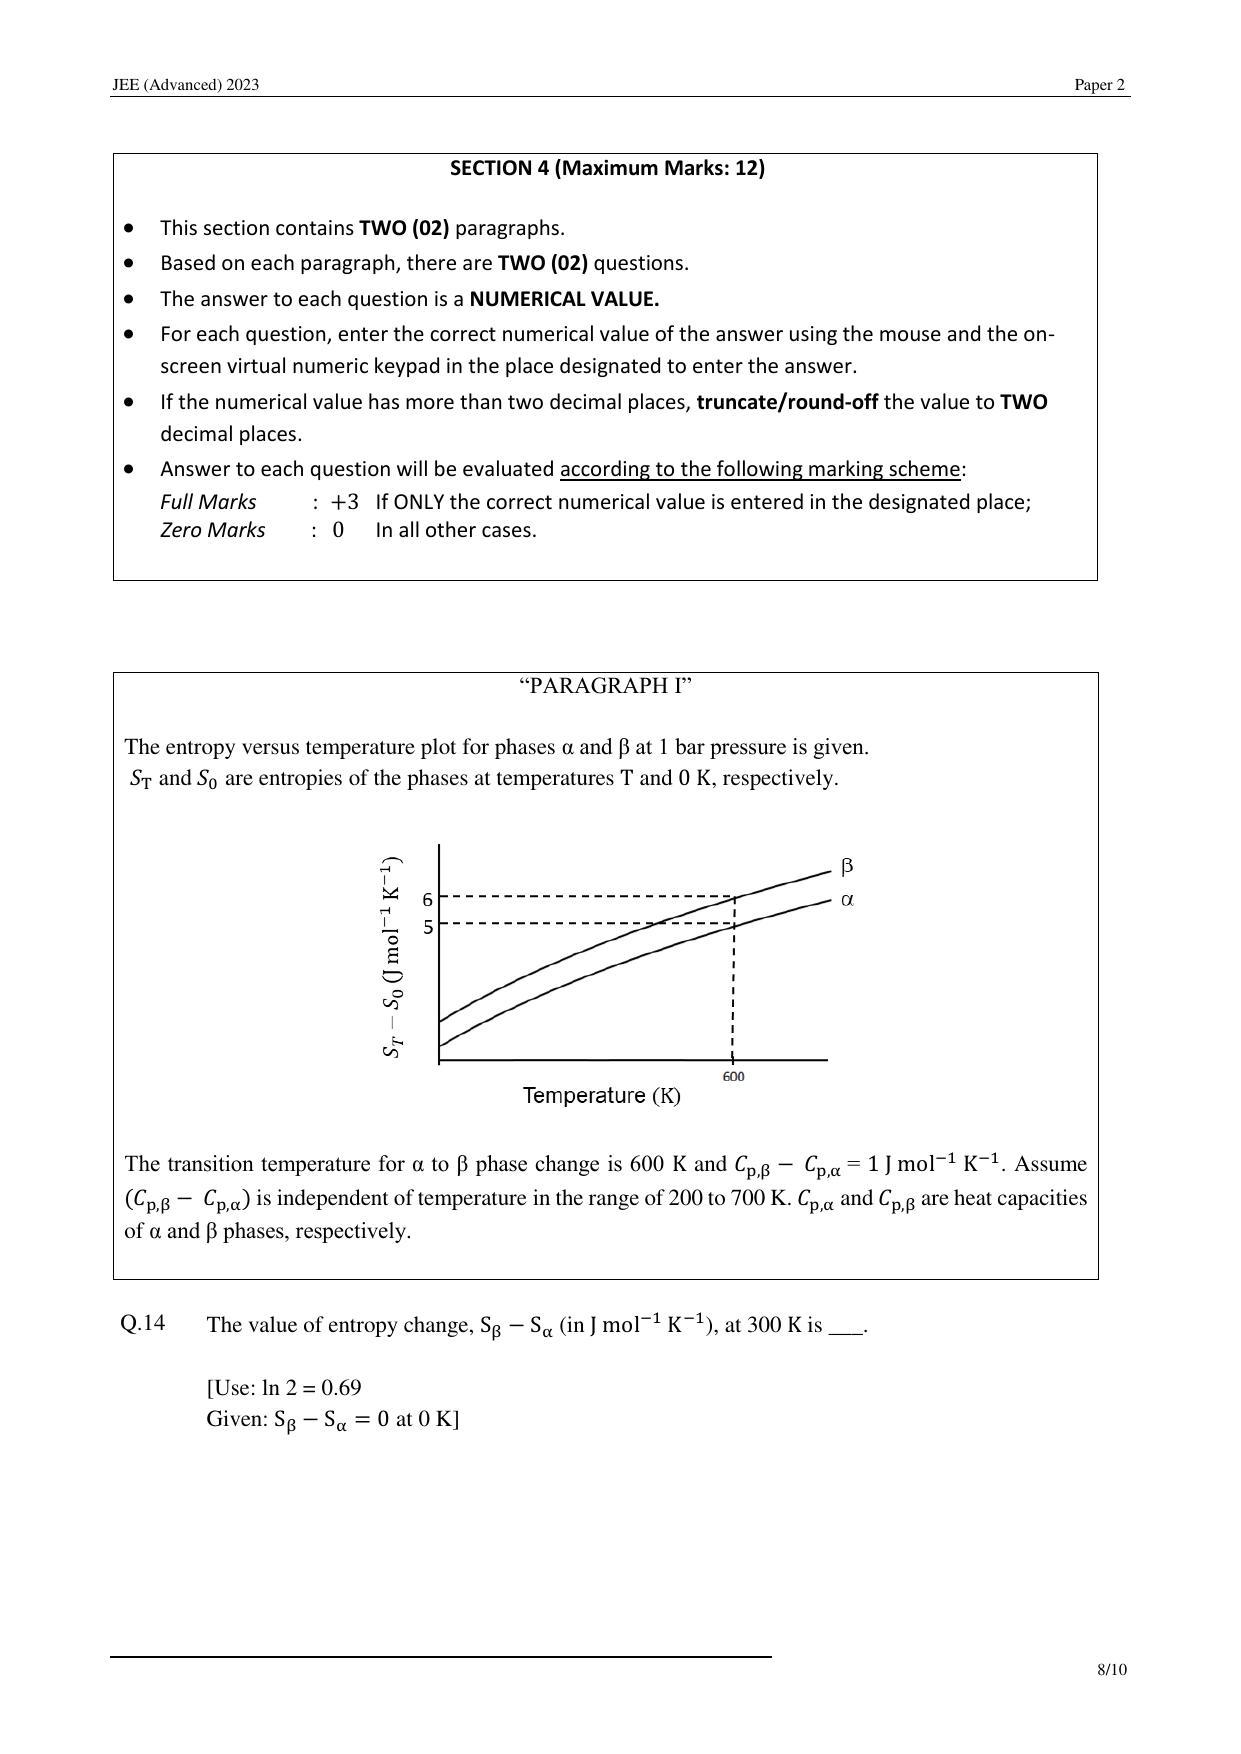 JEE (Advanced) 2023 Paper II - Mathematics Question Paper - Page 29